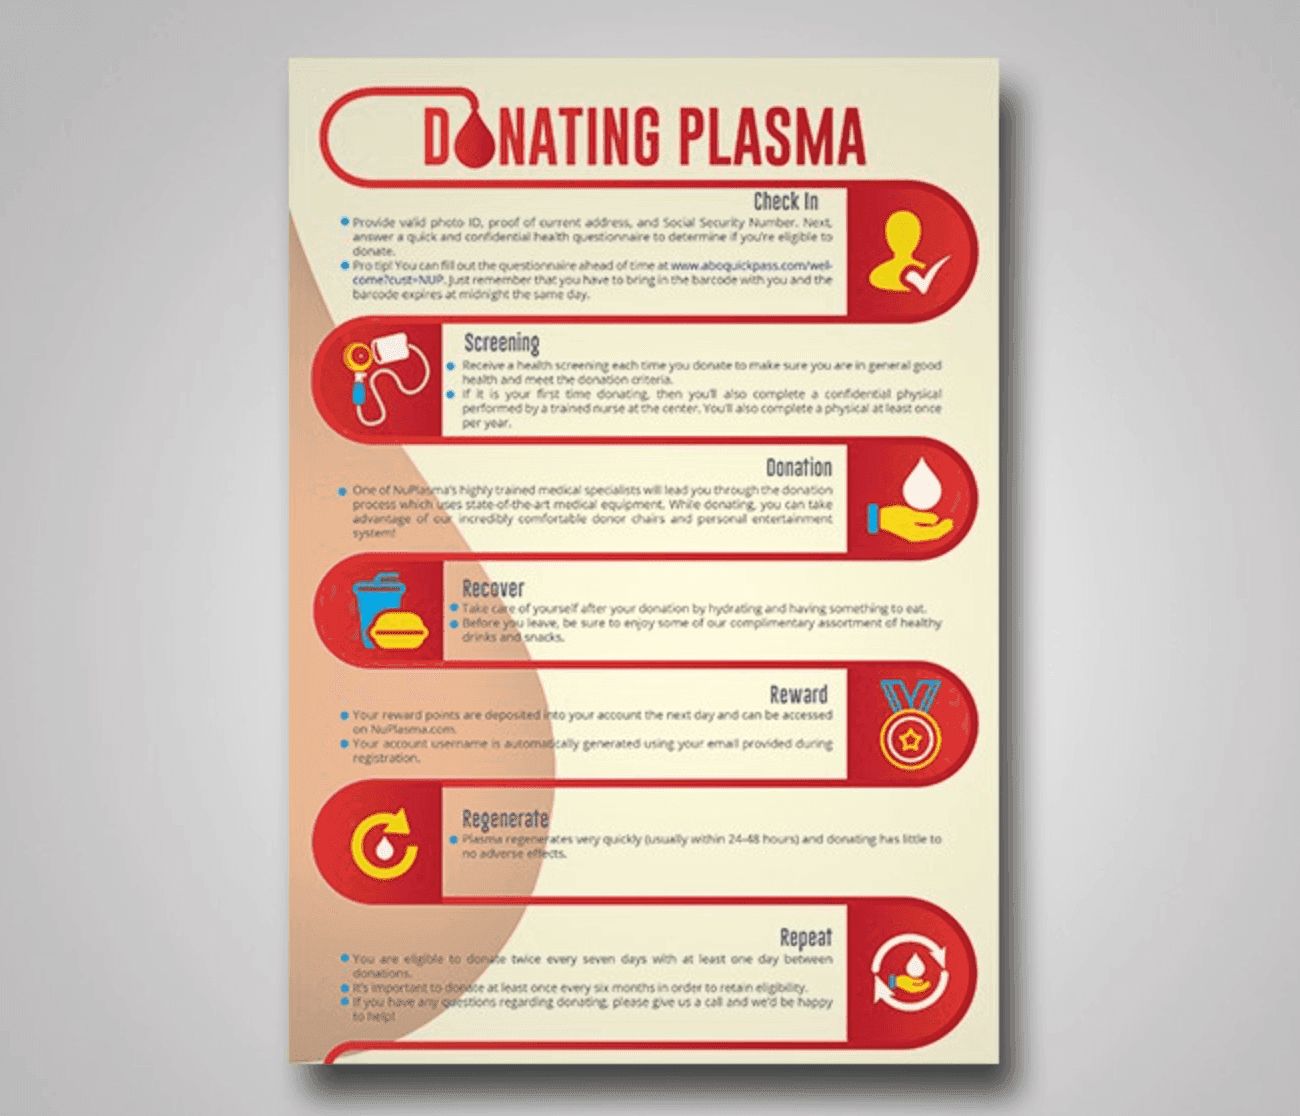 An example of a flyer with the step by step process to donating plasma.